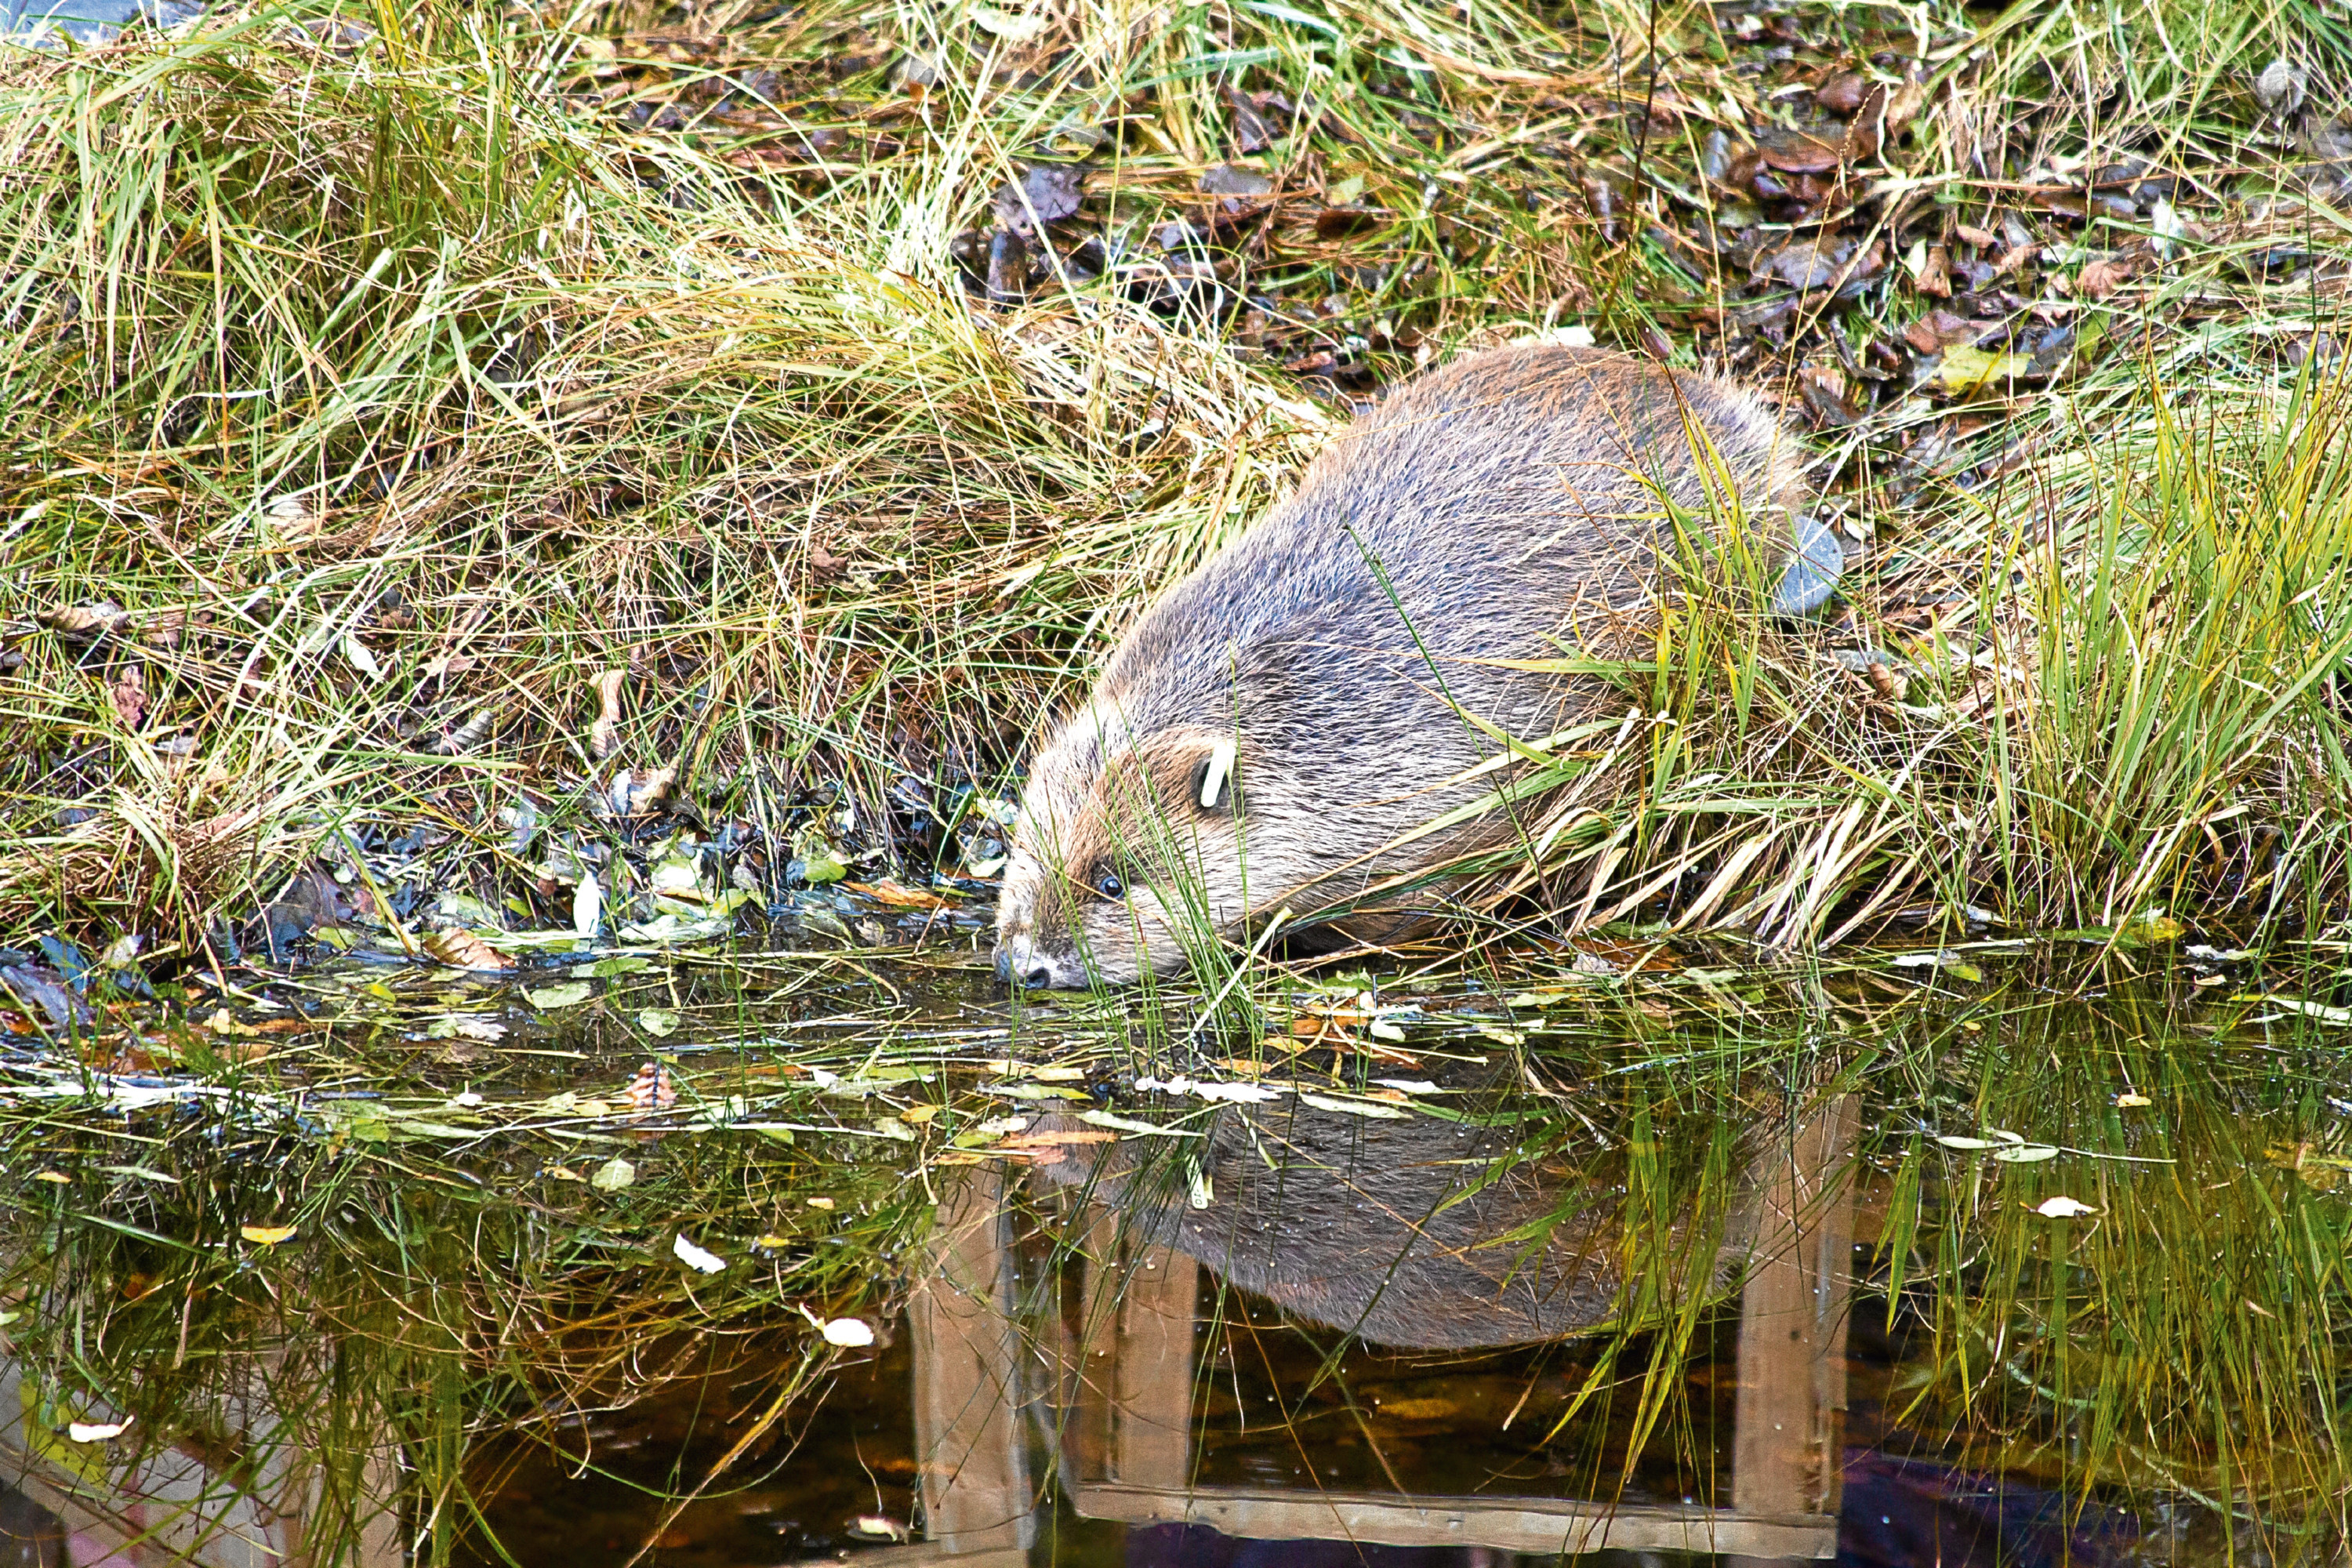 One of the beavers successfully reintroduced to Knapdale Forest in Argyll and Bute in an official trial.